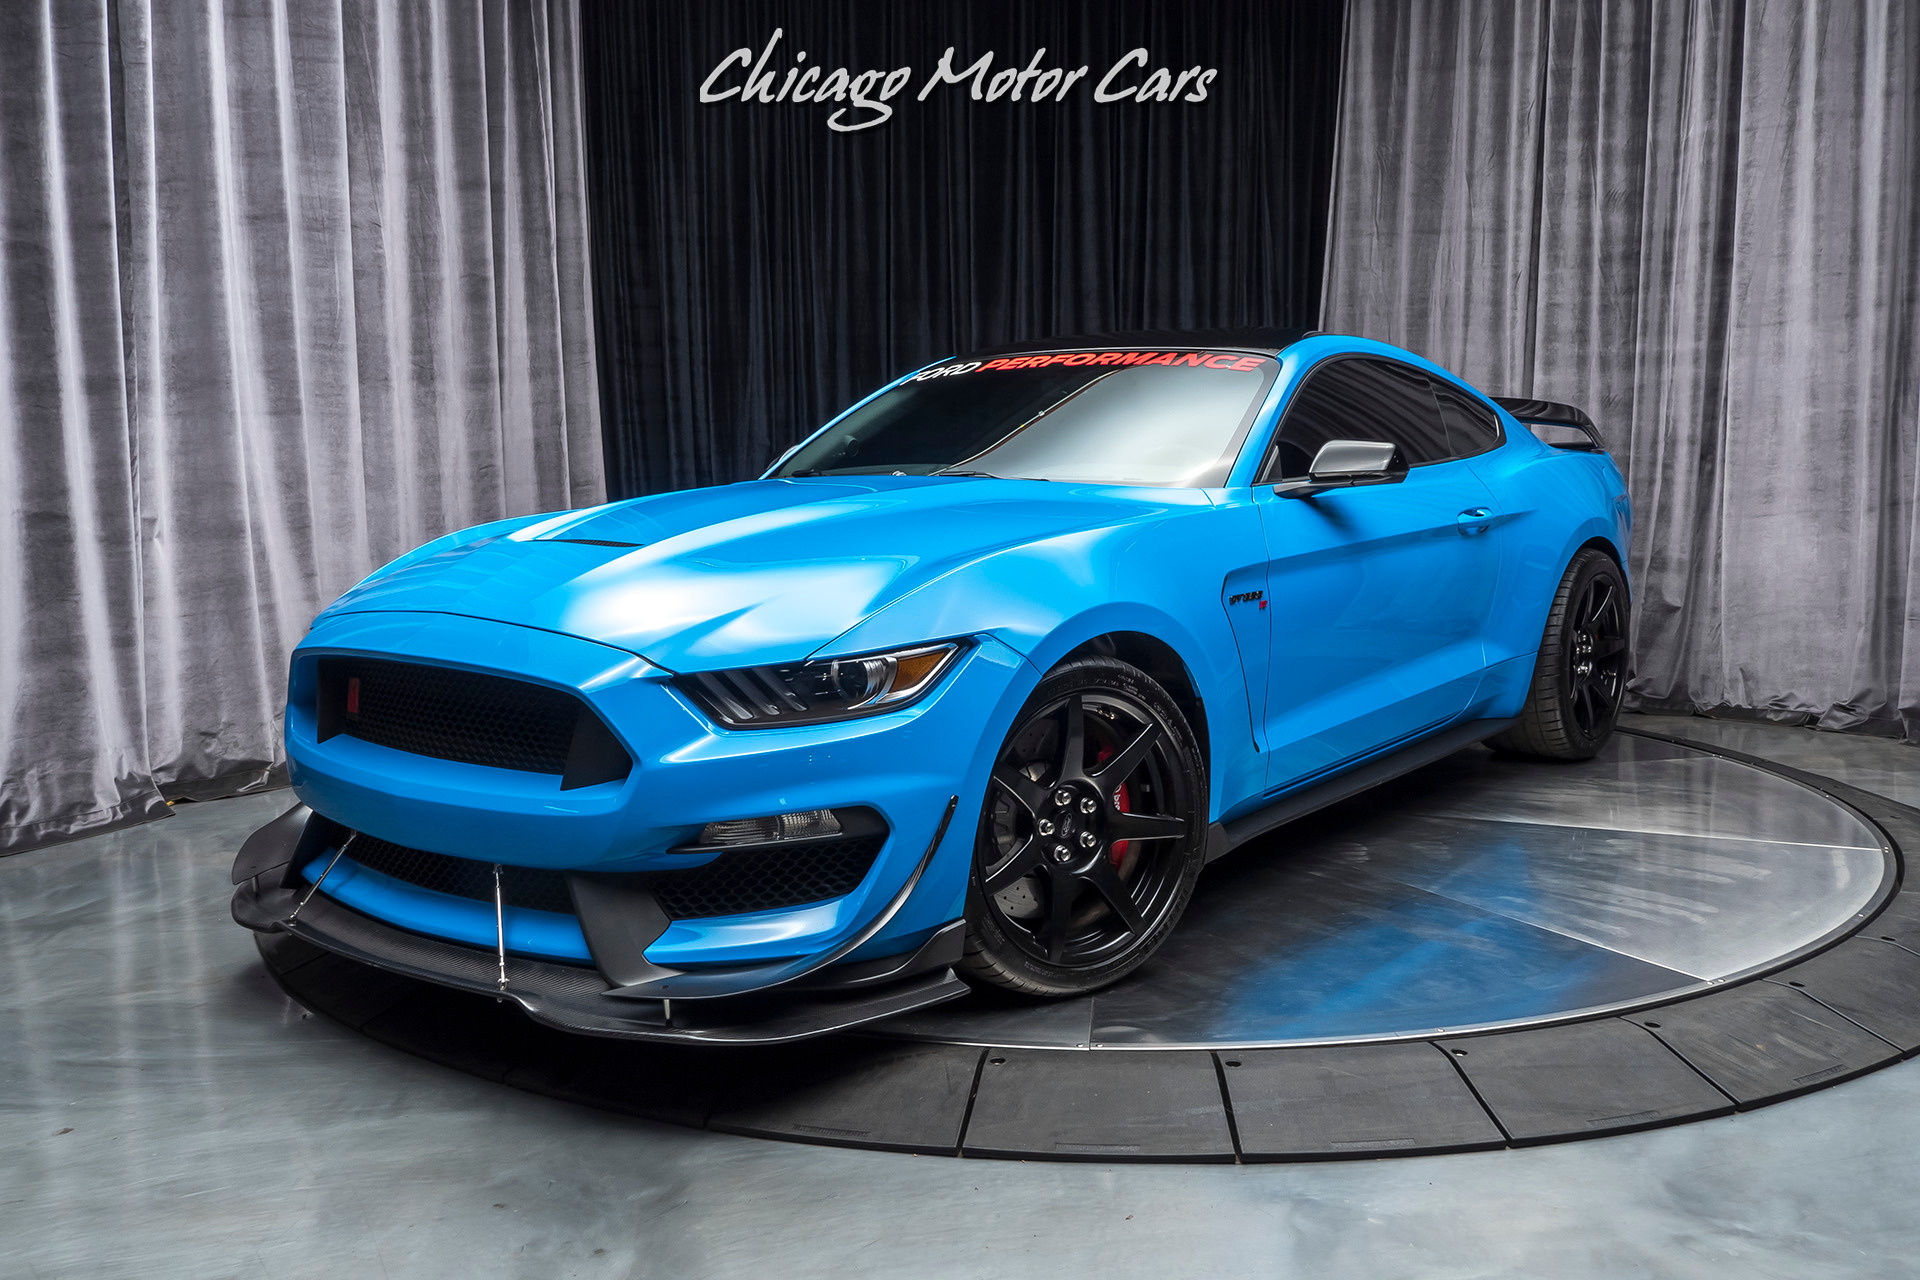 Used 2017 Ford Mustang Shelby GT350R Coupe R ELECTRONICS PACKAGE+ TASTEFUL  UPGRADES! For Sale (Special Pricing) | Chicago Motor Cars Stock #17307